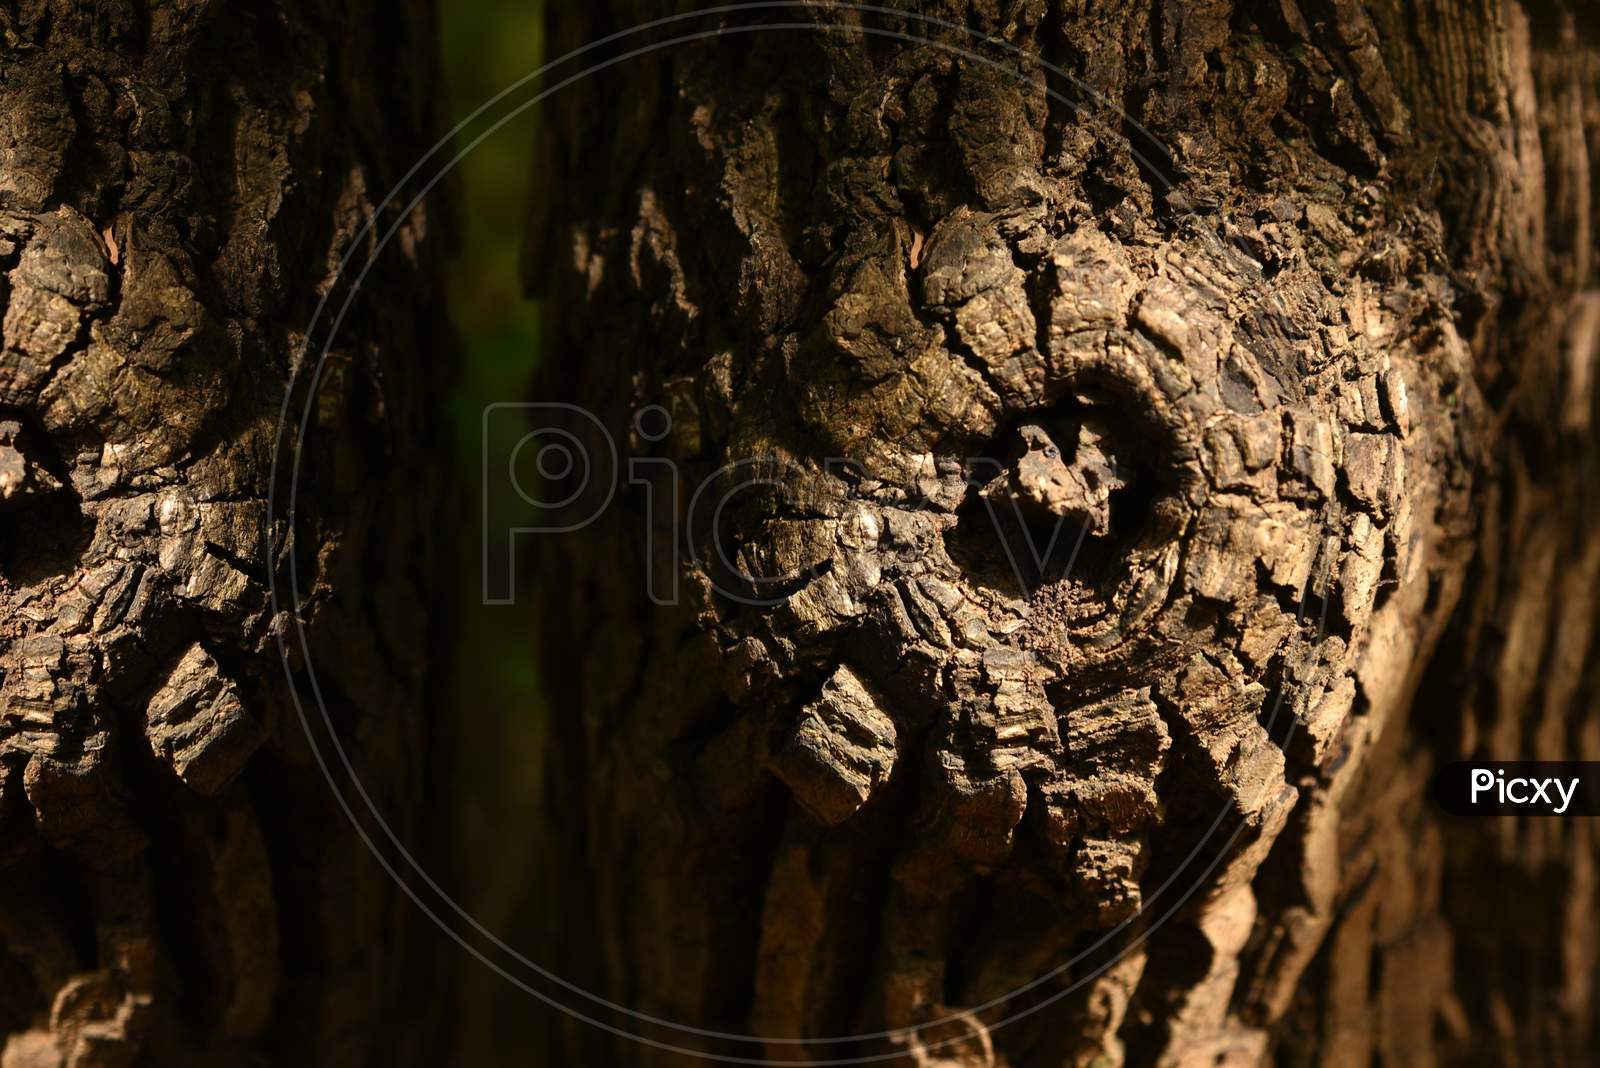 Natural Wood Background Stock Image With Text Space.